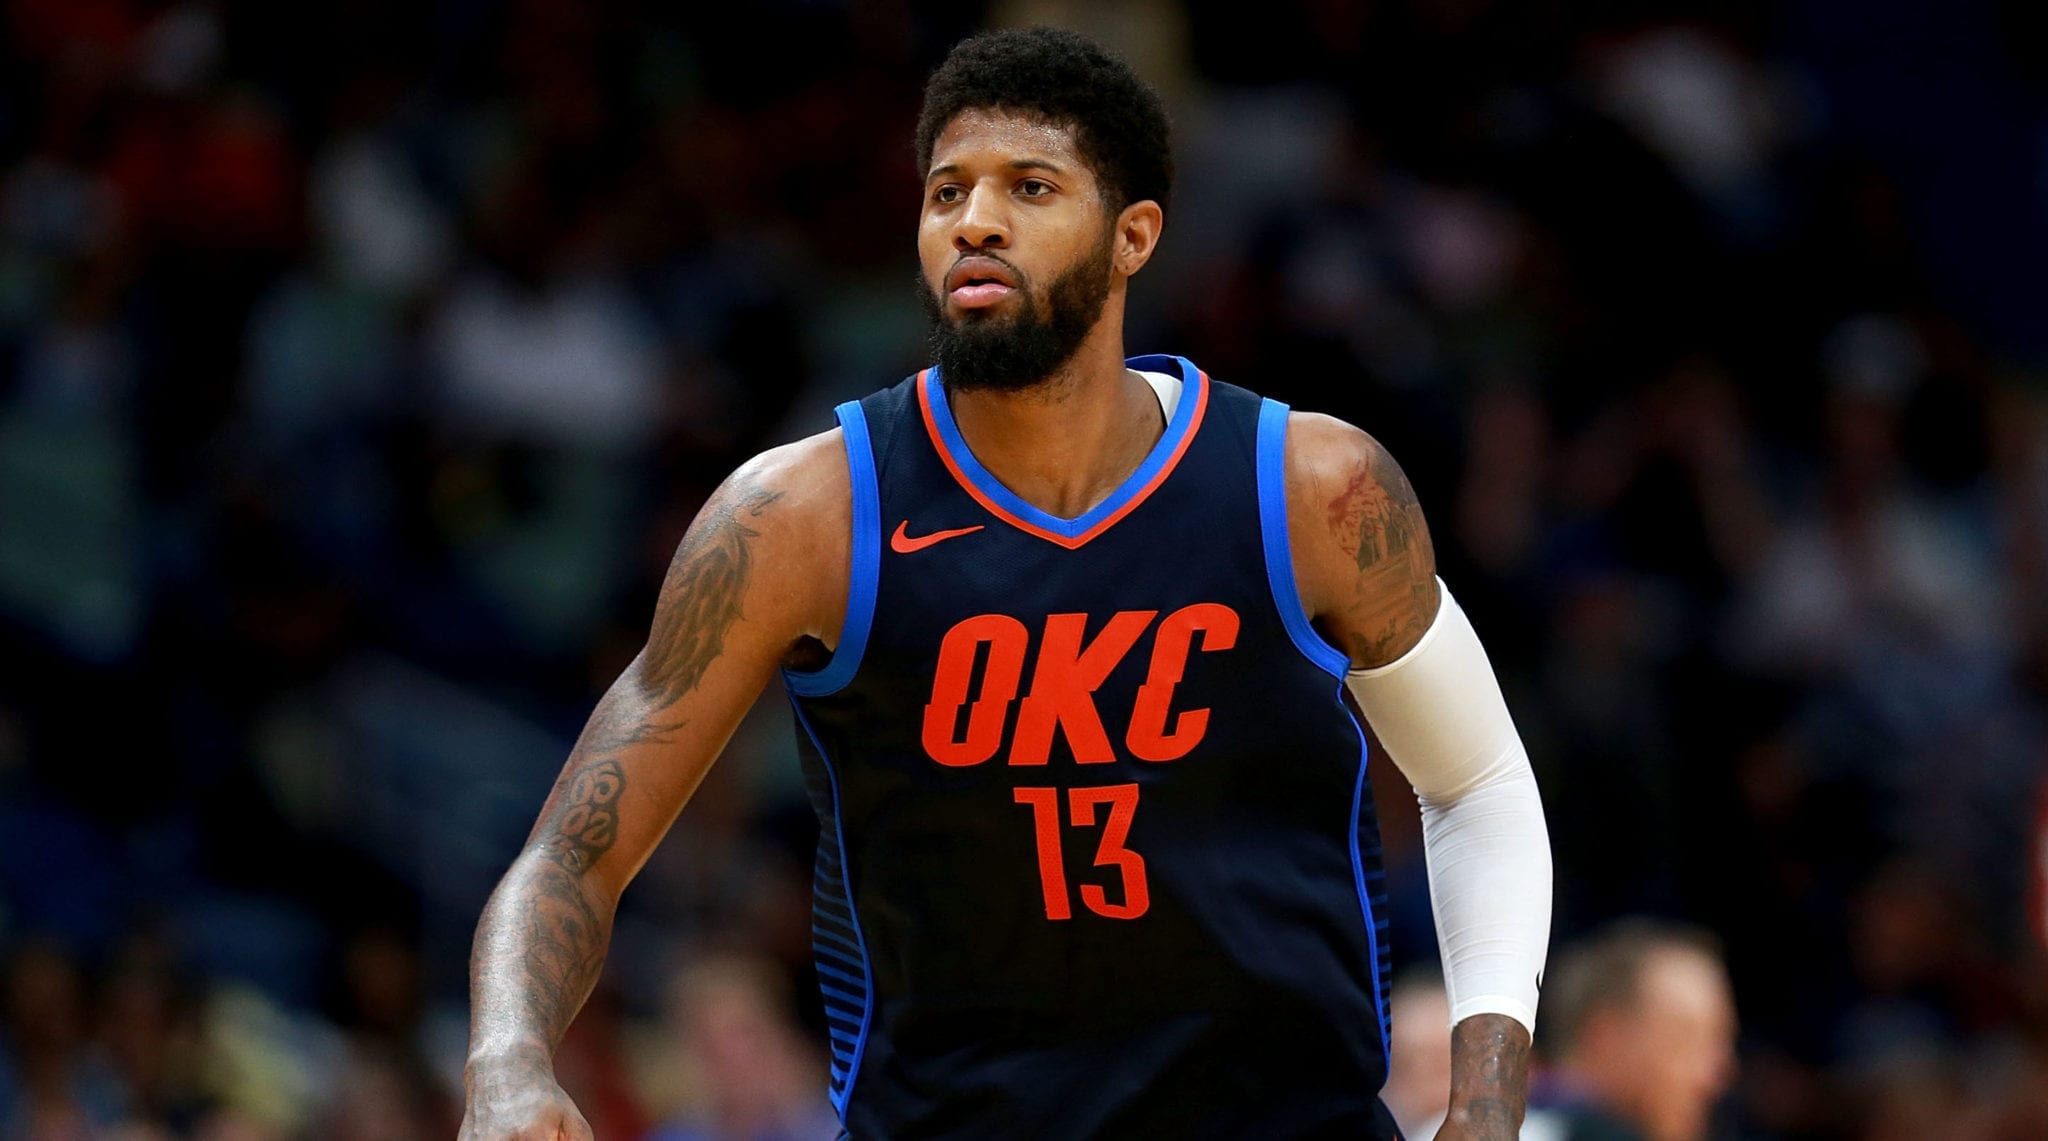 Paul George Slams Refs: 'There's Gotta Be A Change'